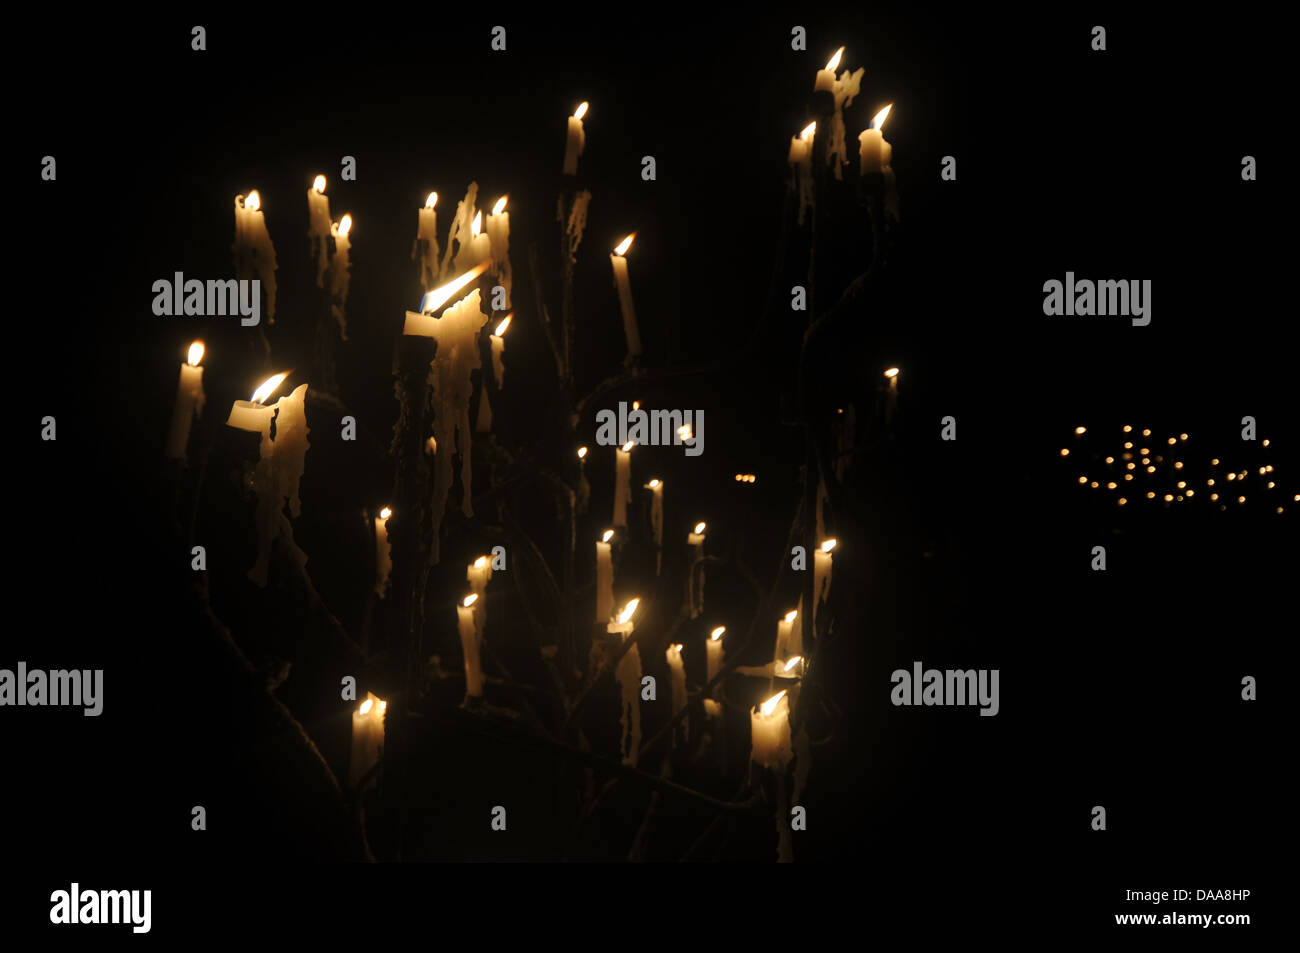 Many candles dripping wax in darkened mysterious candelabra Stock Photo